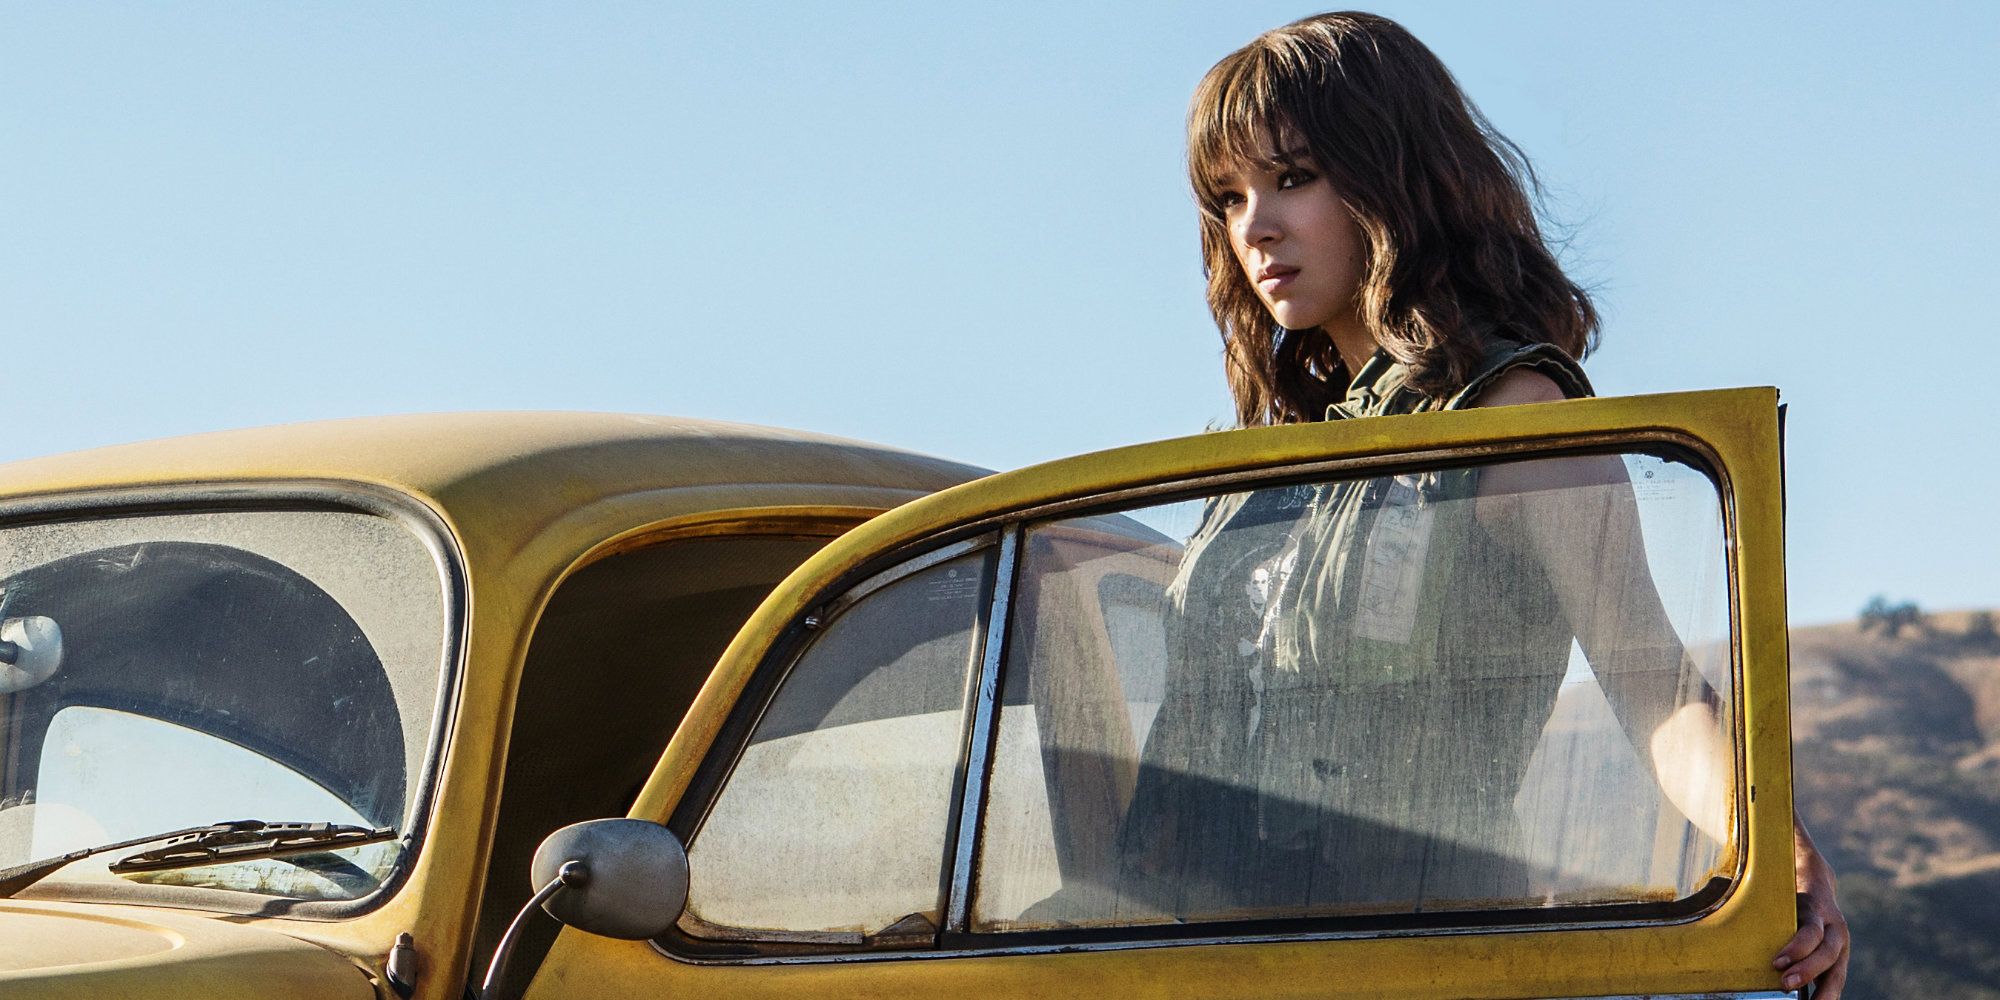 Charli is about to ride in her car in Bumblebee.